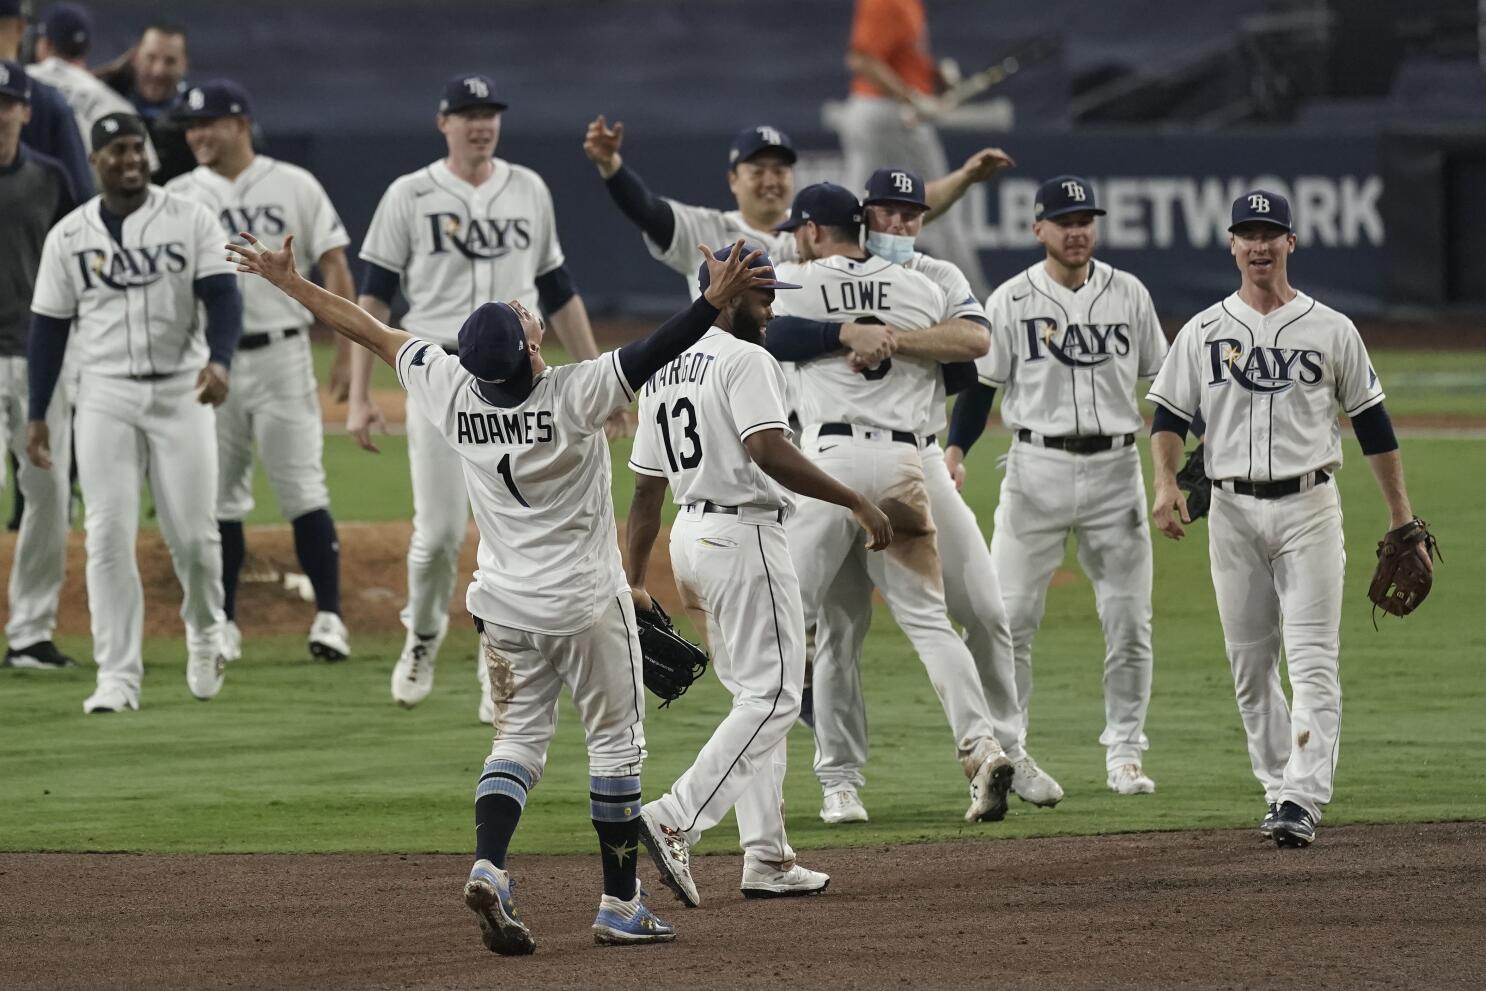 Tampa Bay Rays - The final final of the 2020 season